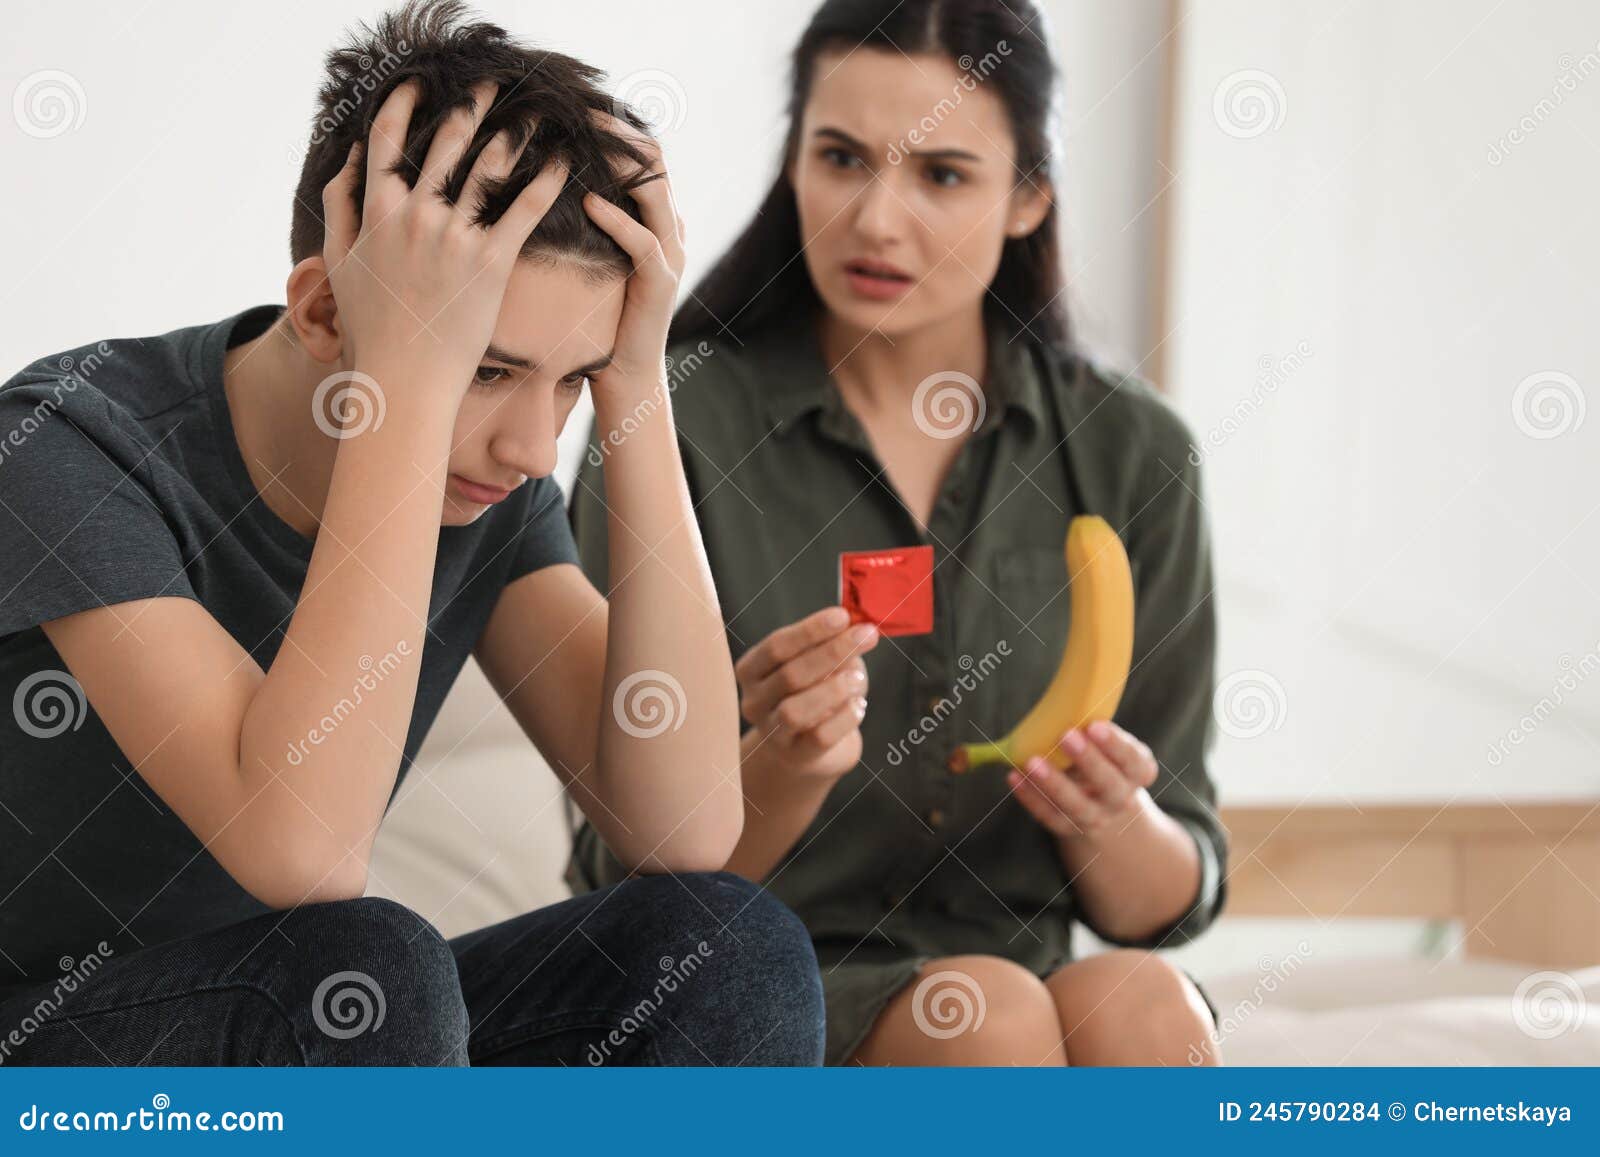 Mother Talking with Her Teenage Son about Contraception at Home picture photo